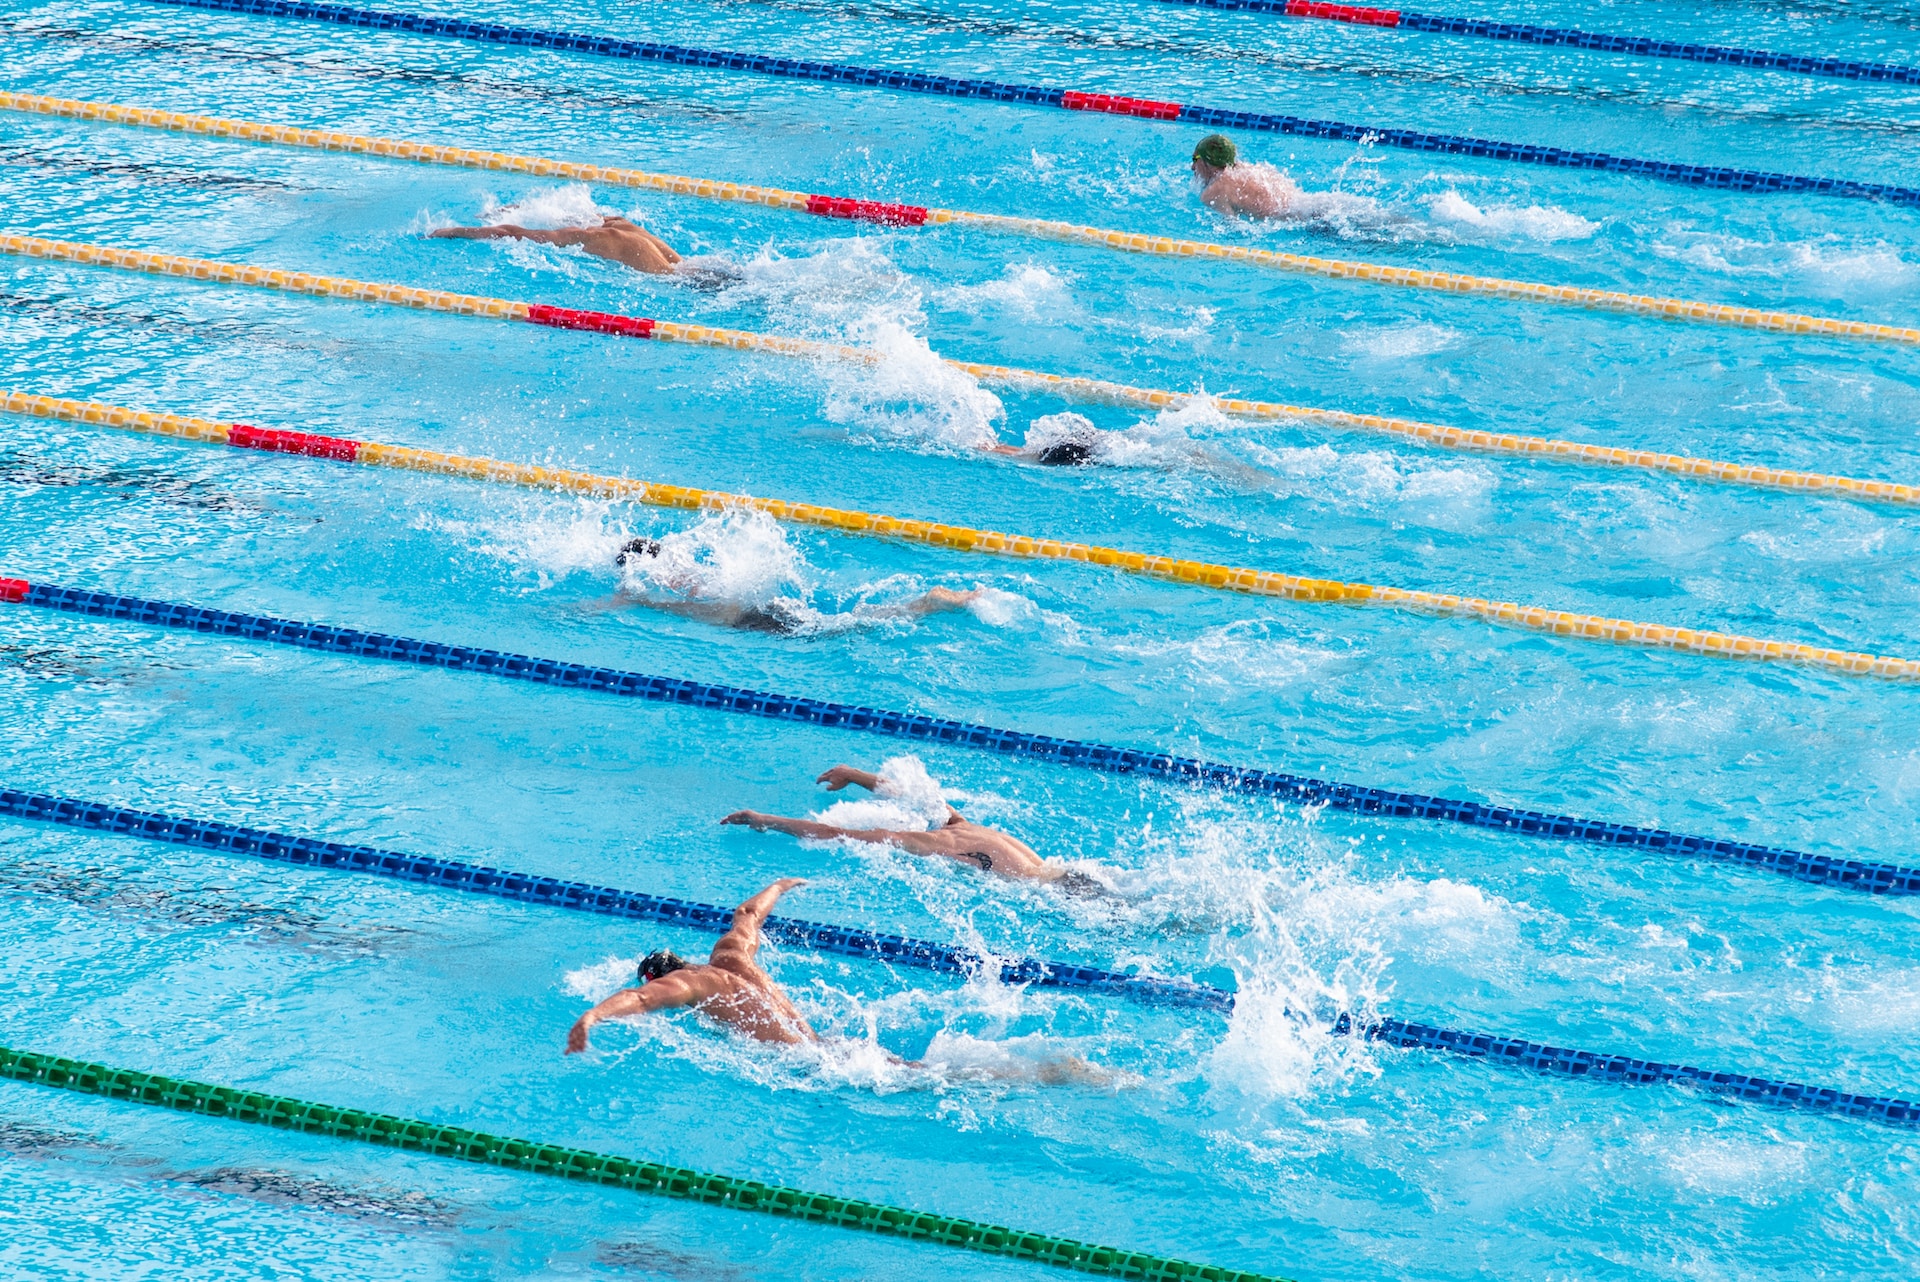 Six swimmers in a swimming pool, competing in a race. One swimmer is leading by quite some way.